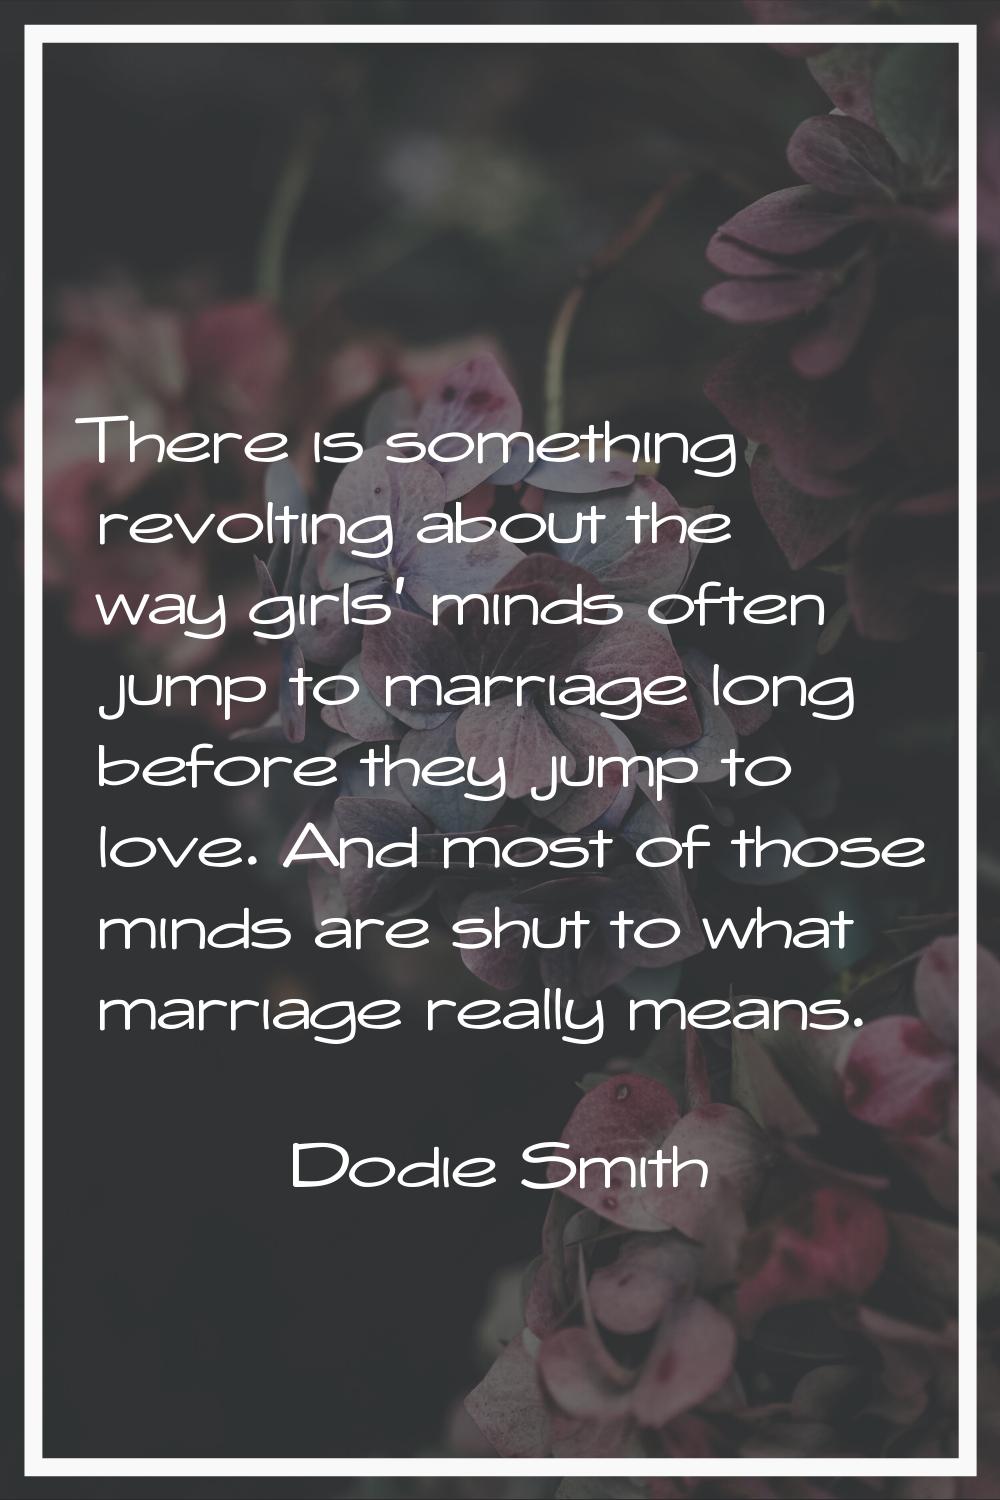 There is something revolting about the way girls' minds often jump to marriage long before they jum